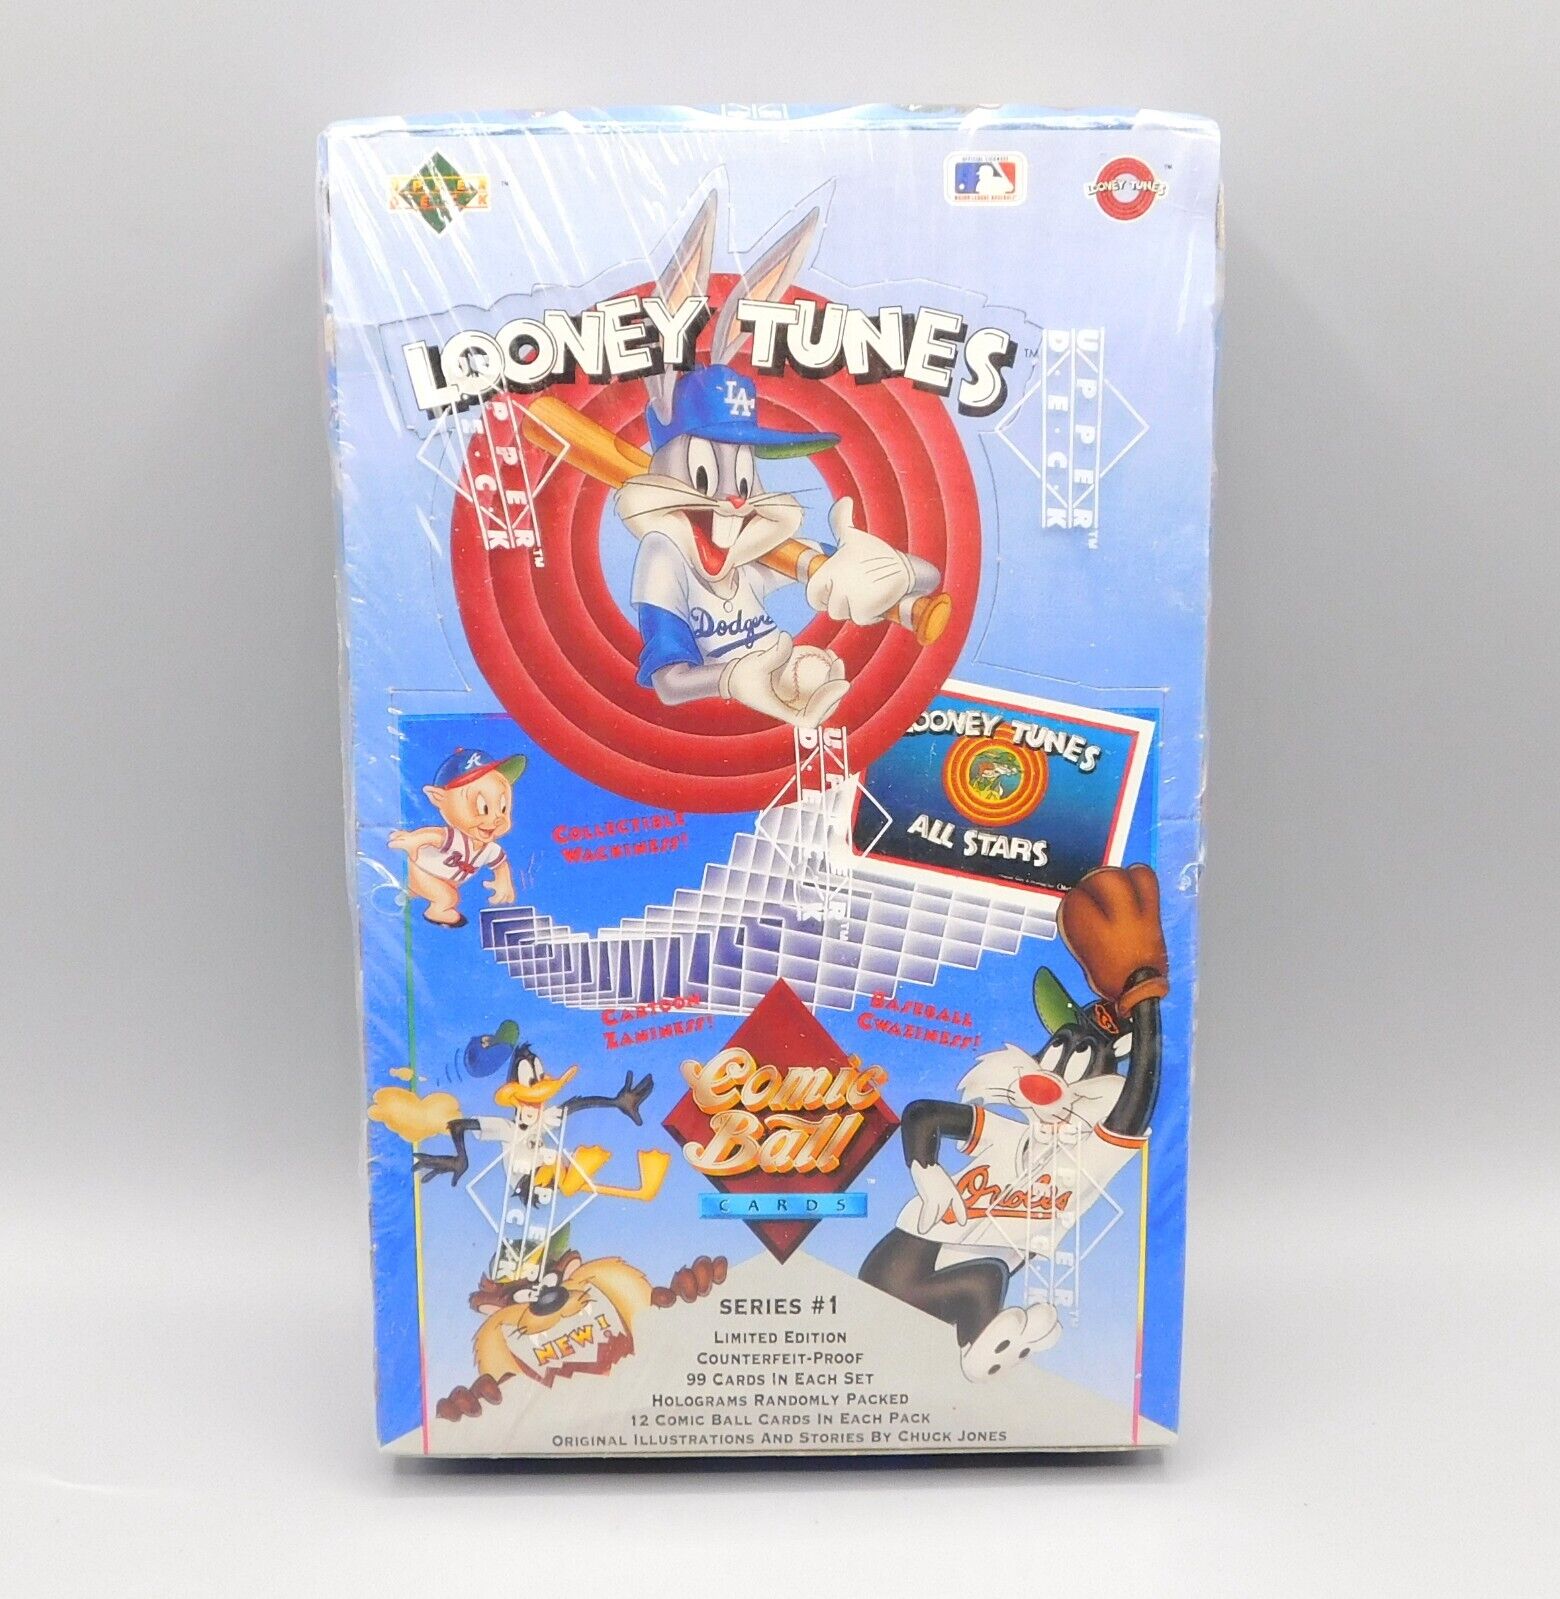 1990 Upper Deck Looney Tunes Comic Ball Cards Box ~ Factory Sealed